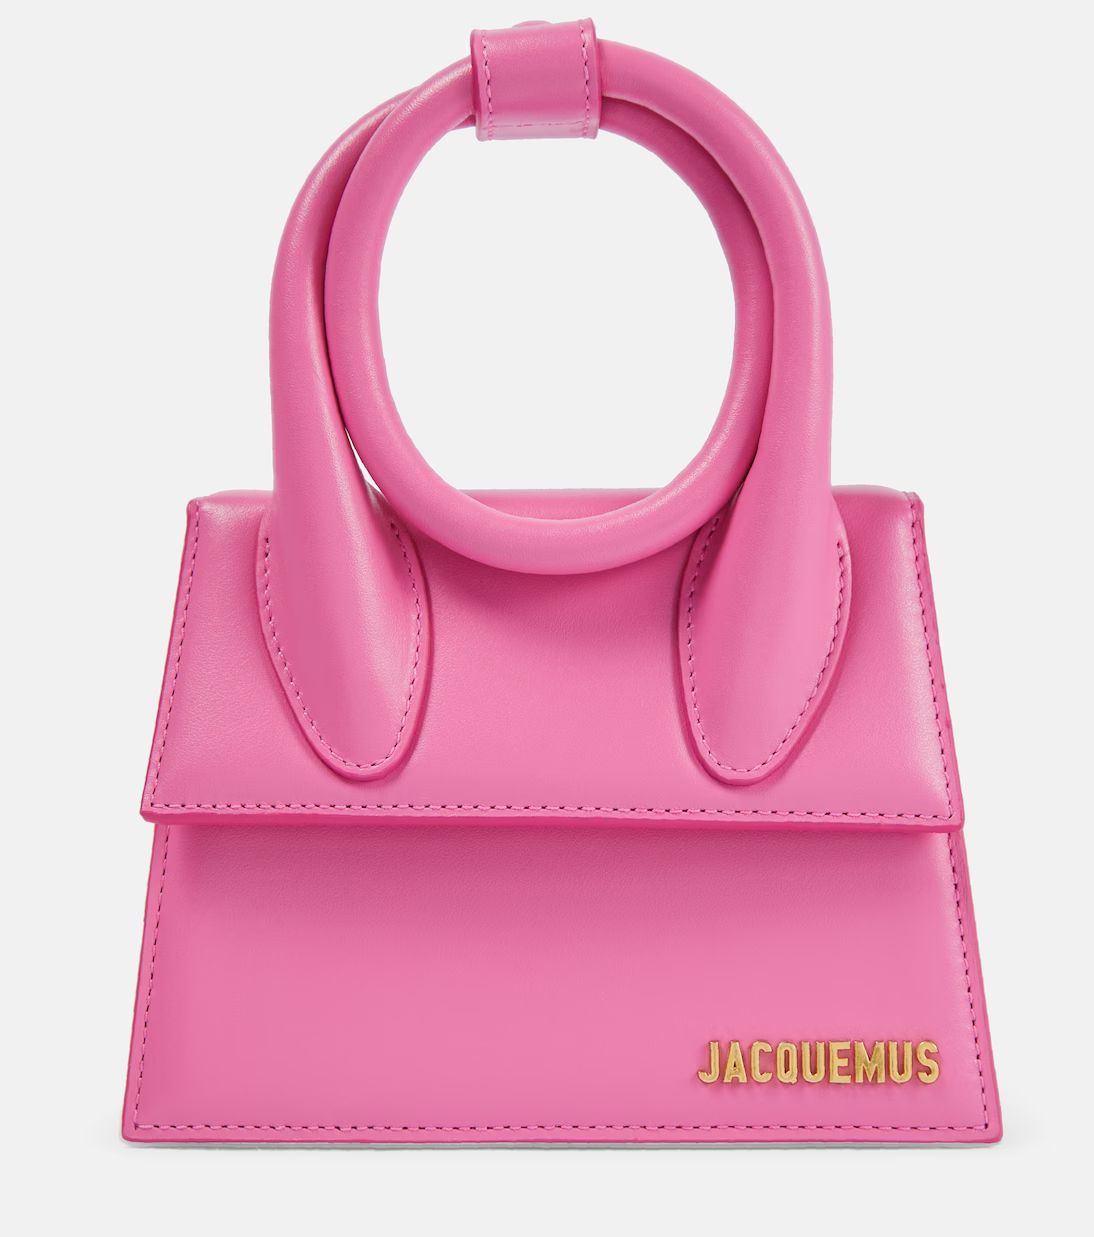 £ 745
incl. duties and VAT, excl. shipping costs
ADD TO BAG
ADD TO WISHLIST
Free Shipping on orders over £350
PRODUCT DETAILS
Featuring a distinctive enlongated top handle that can be wound with a snap-button fastening, the pink leather Noued tote bag is a new-season take on Jacquemus' iconic Chiquito design.
Made in Spain
Color of fastening: gold
Designer color name: Pink
Detachable, adjustable shoulder strap
Internal details: fabric lining
Closure: magnetic fastening
Back slot pocket
Material: cow leather
Item number: P00704946
SIZE & FIT
DELIVERY & FREE RETURNS
More questions about this item?
See more Jacquemus
See more Jacquemus Bags by Jacquemus
See more Bags
See more Shoulder Bags
NEW ARRIVAL










 | Mytheresa (UK)